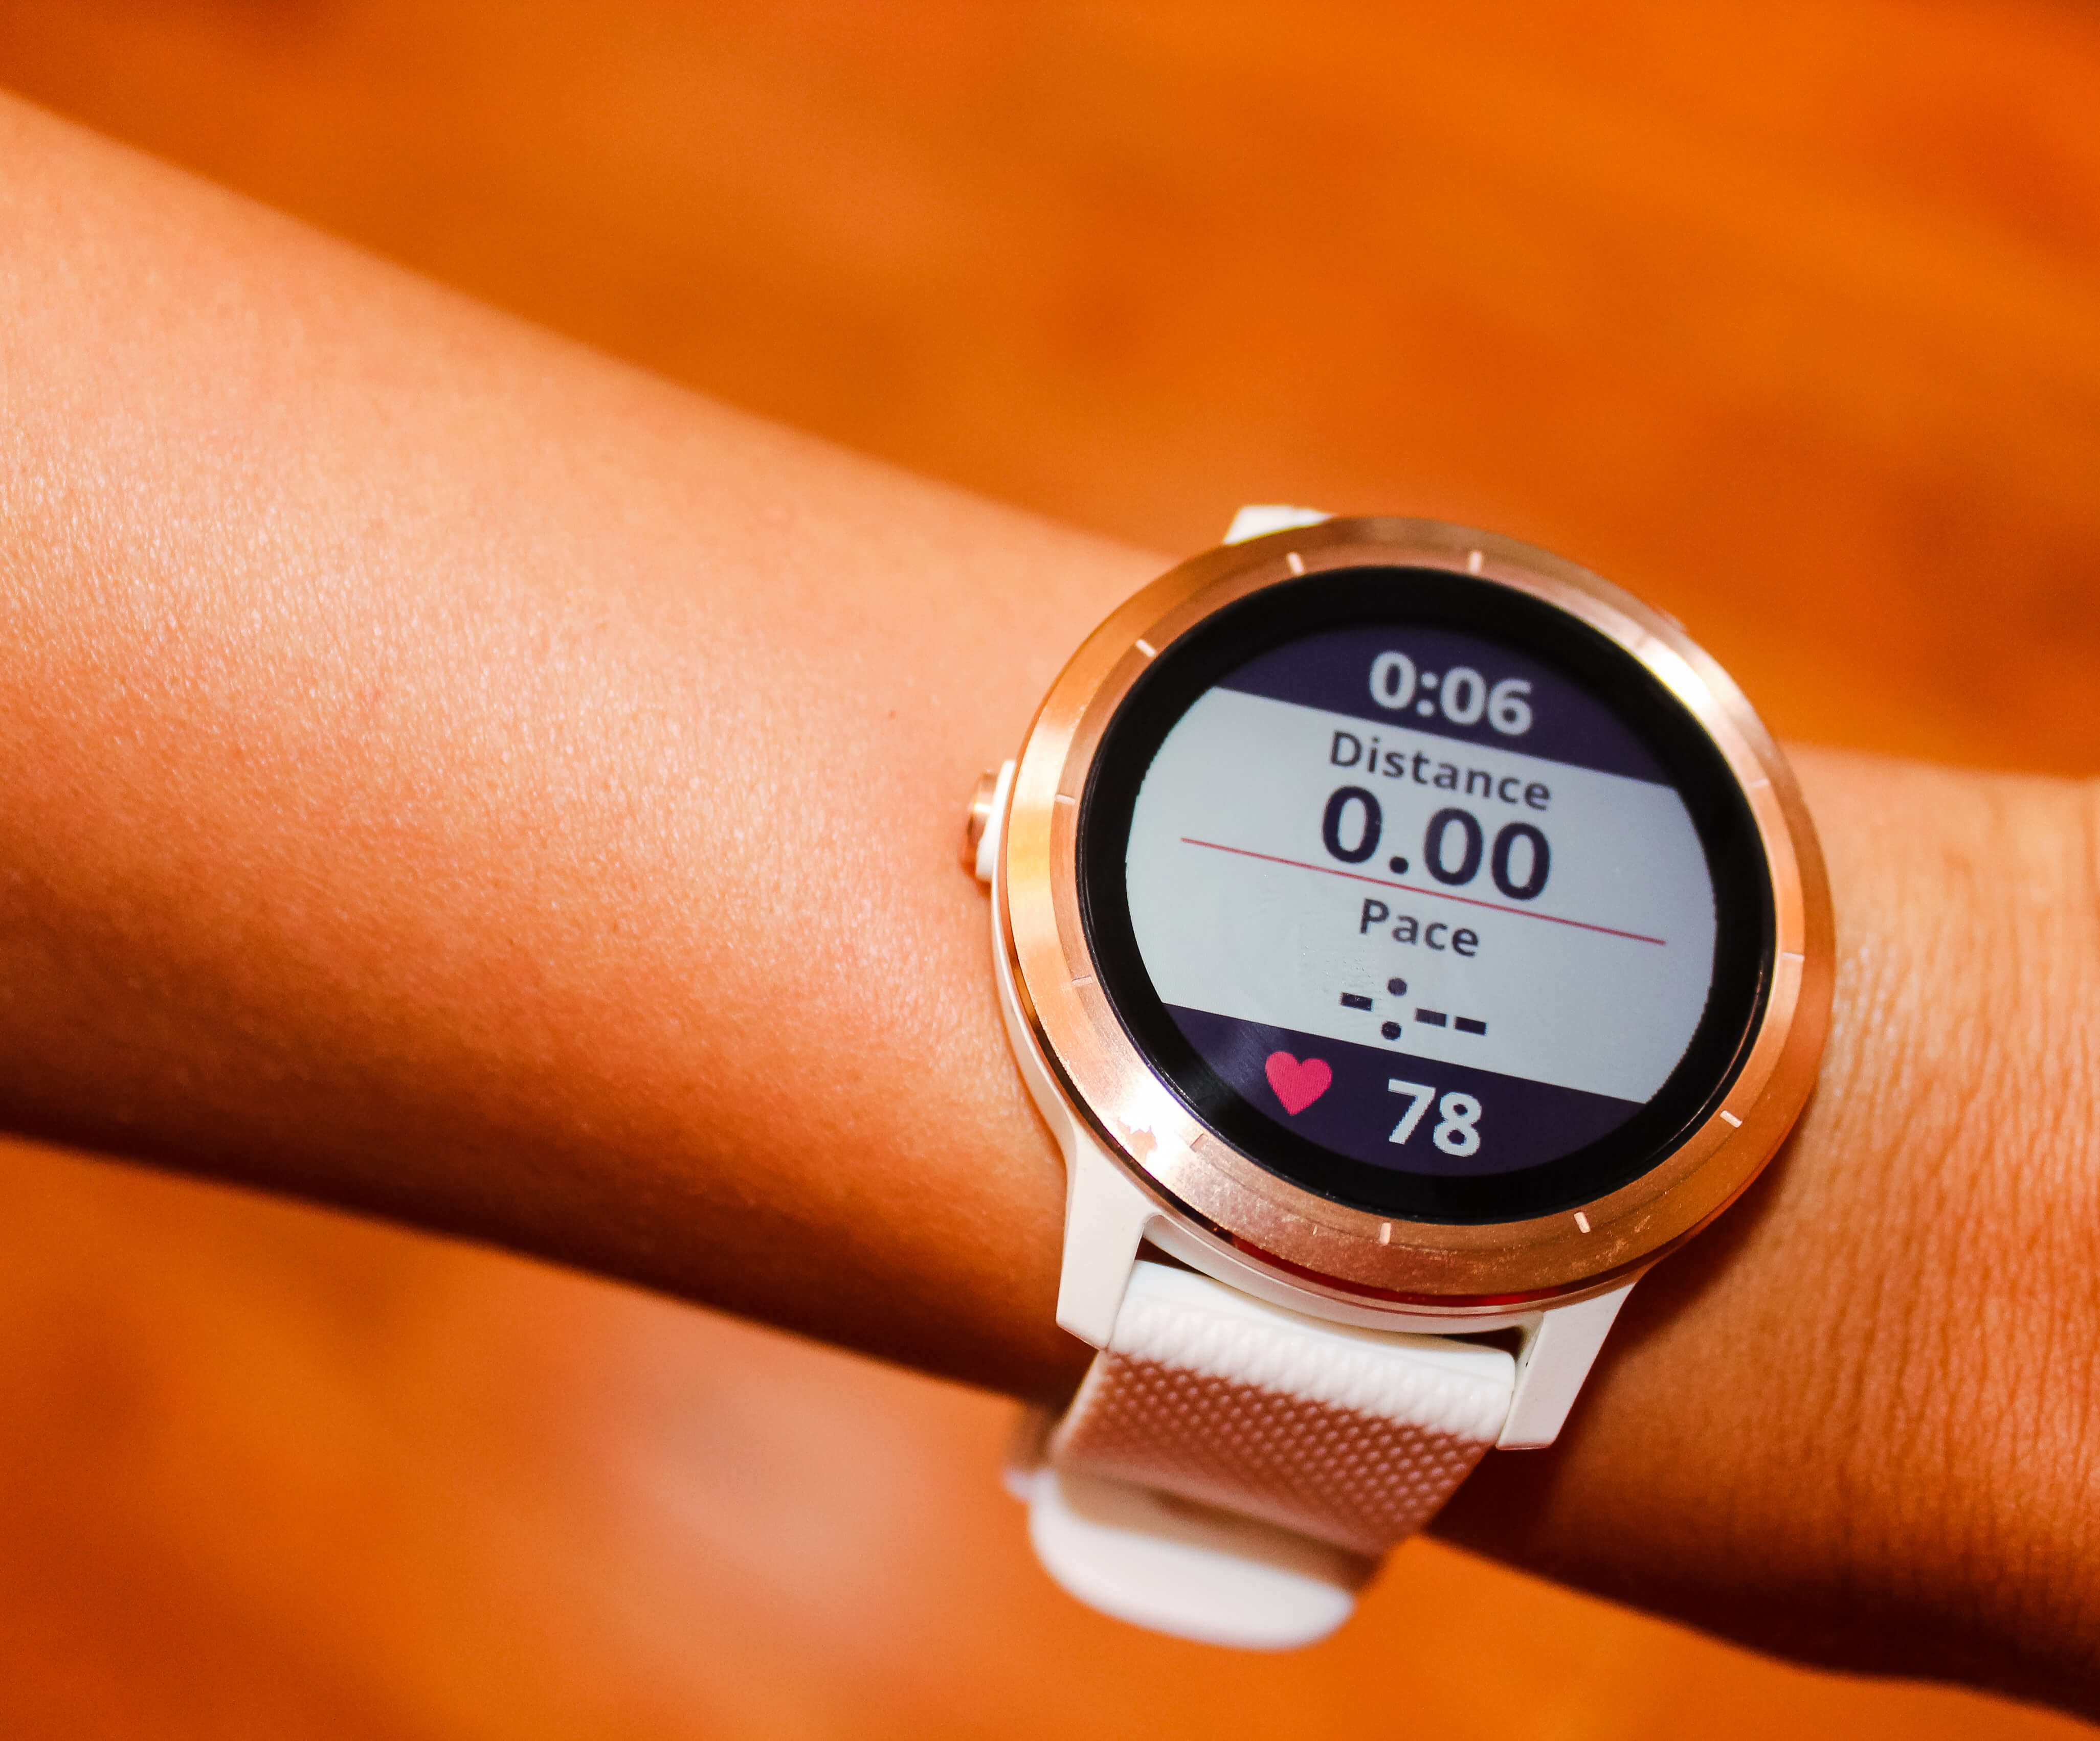 Tips to Using the Vivoactive 3 for Runners | RunnerClick